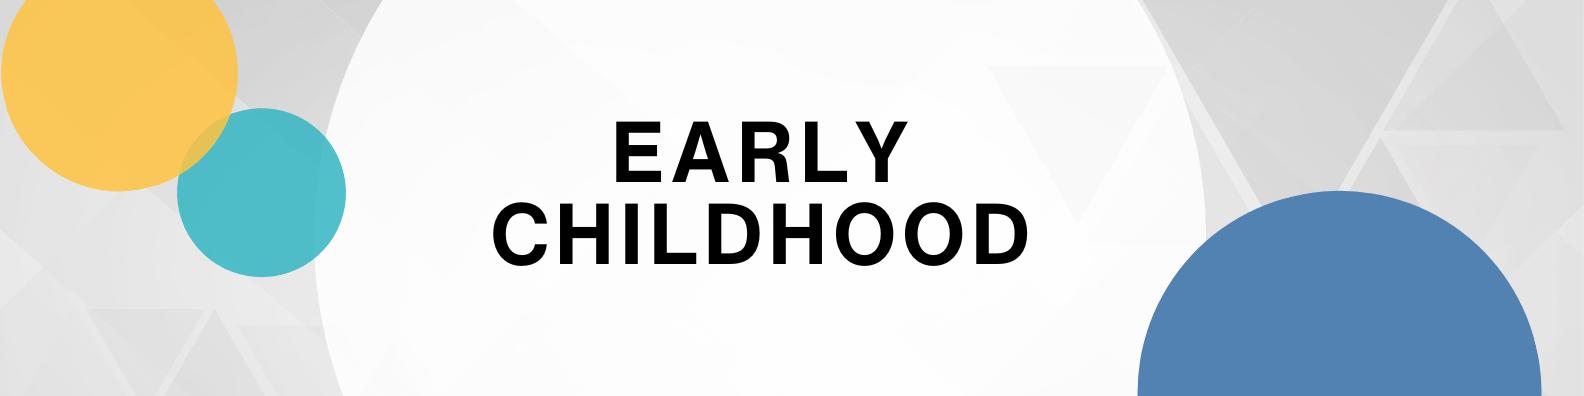 Early_Childhood.png